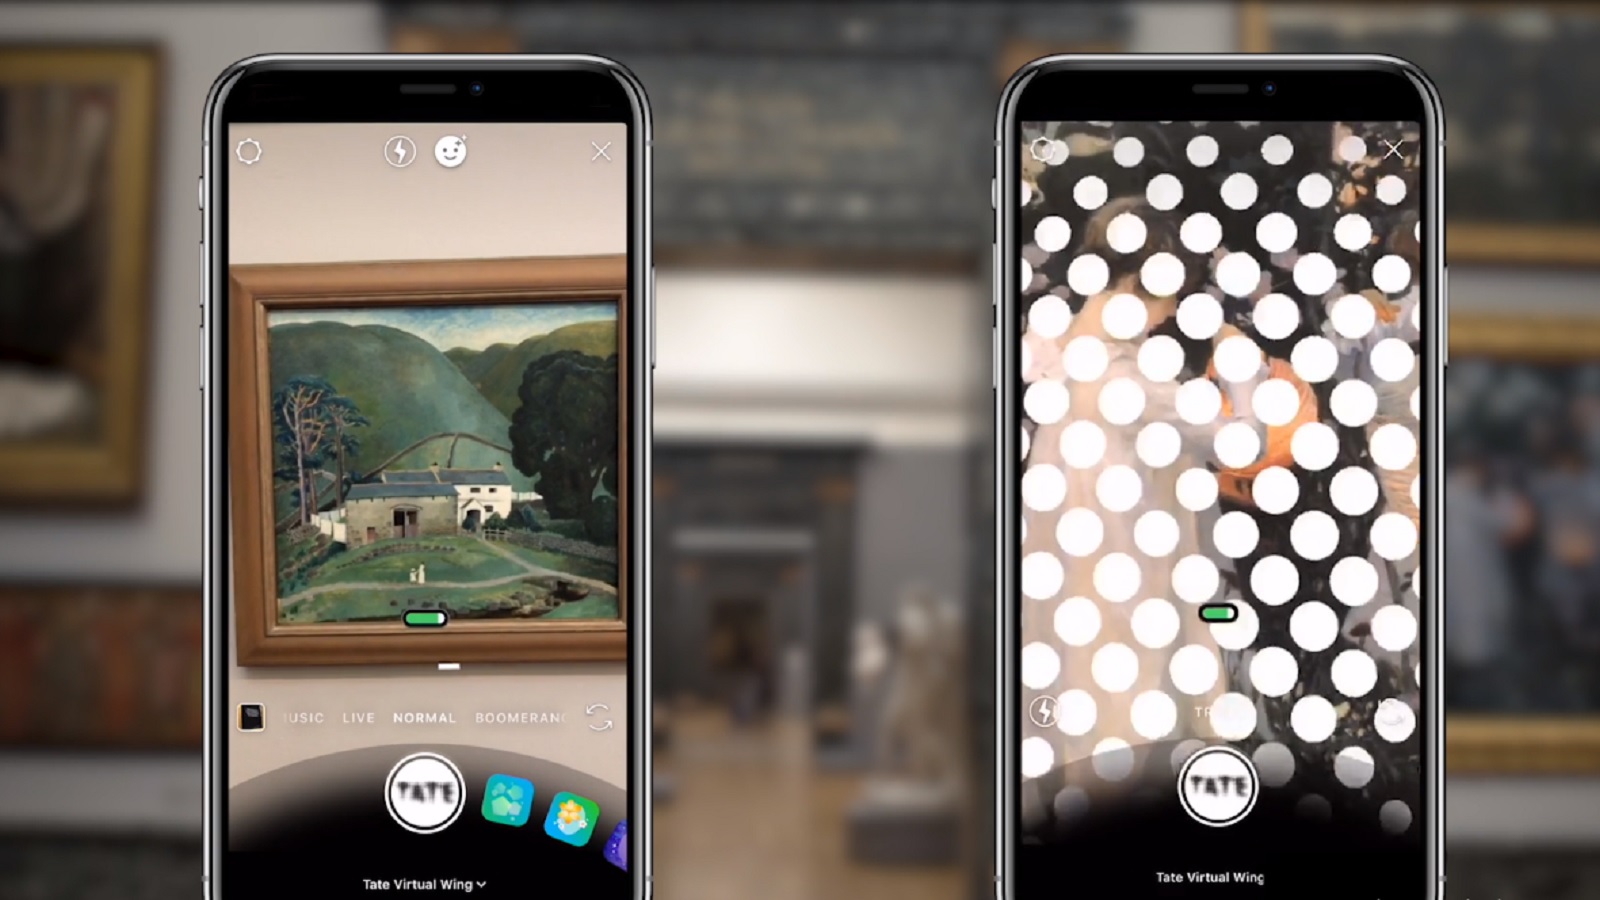 The Tate Britain Uses AR to Bring Its Paintings to Life